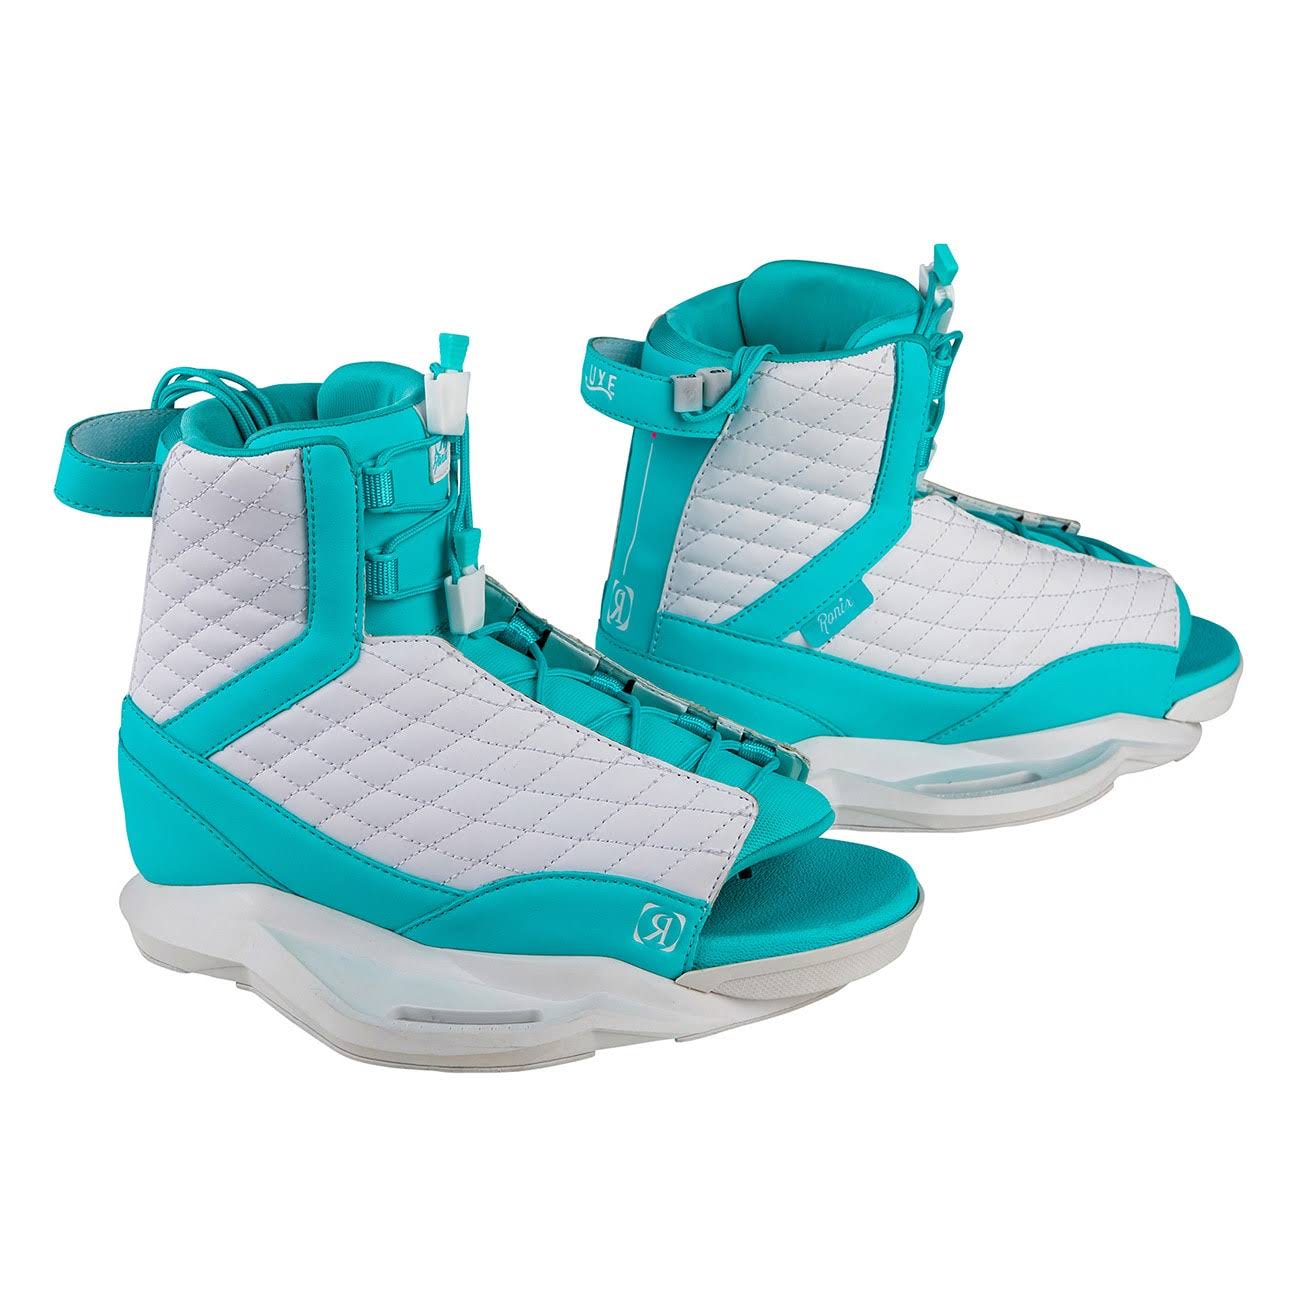 Ronix Luxe Women's Wakeboard Boots 2021 - 6-8.5